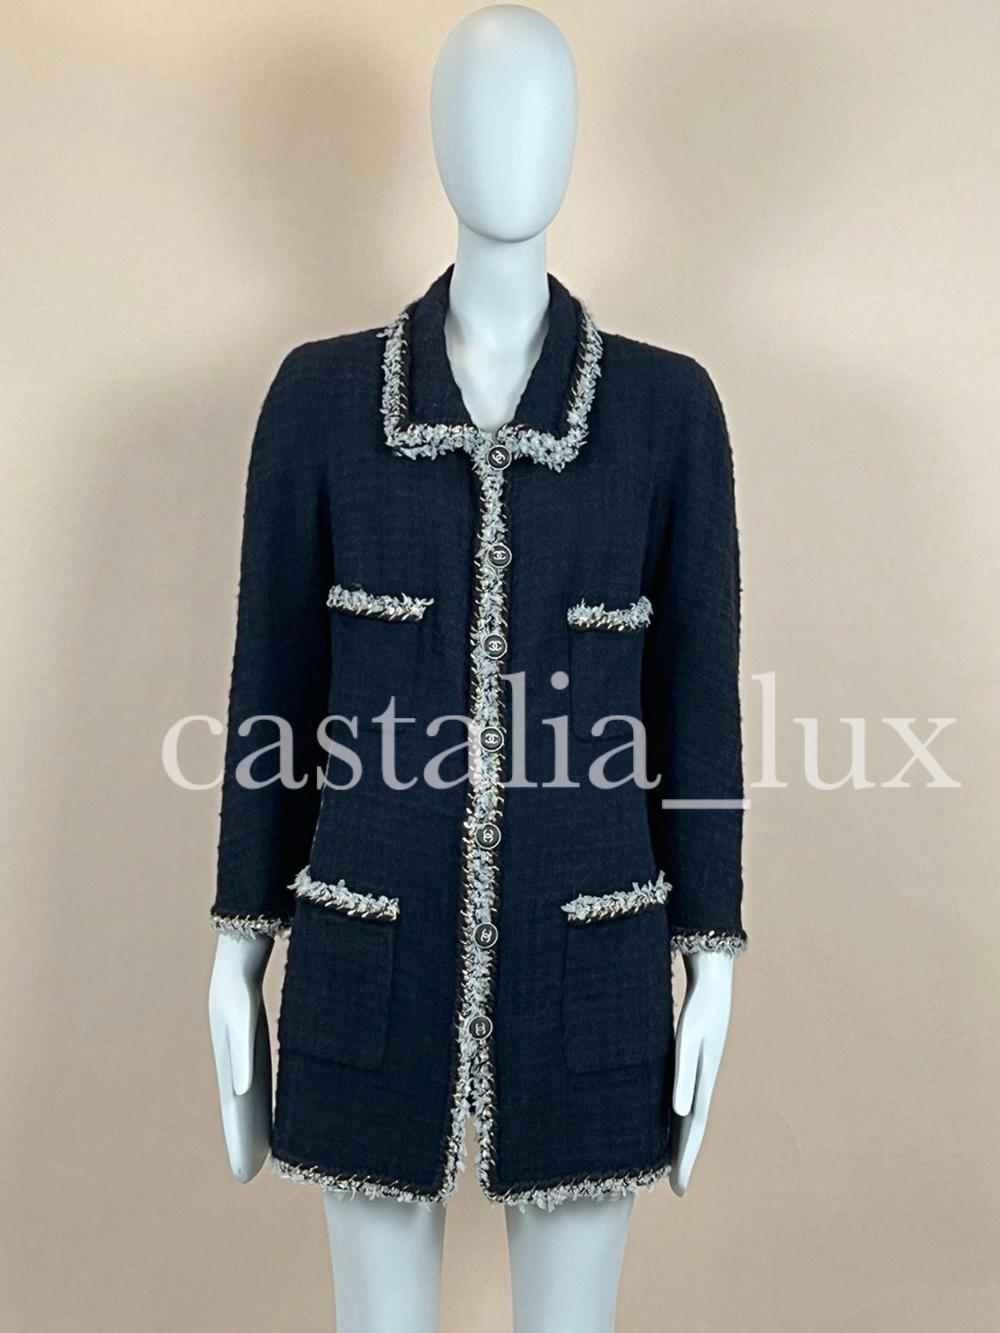 Chanel New Chain Link Trim Black Tweed Jacket In Excellent Condition For Sale In Dubai, AE